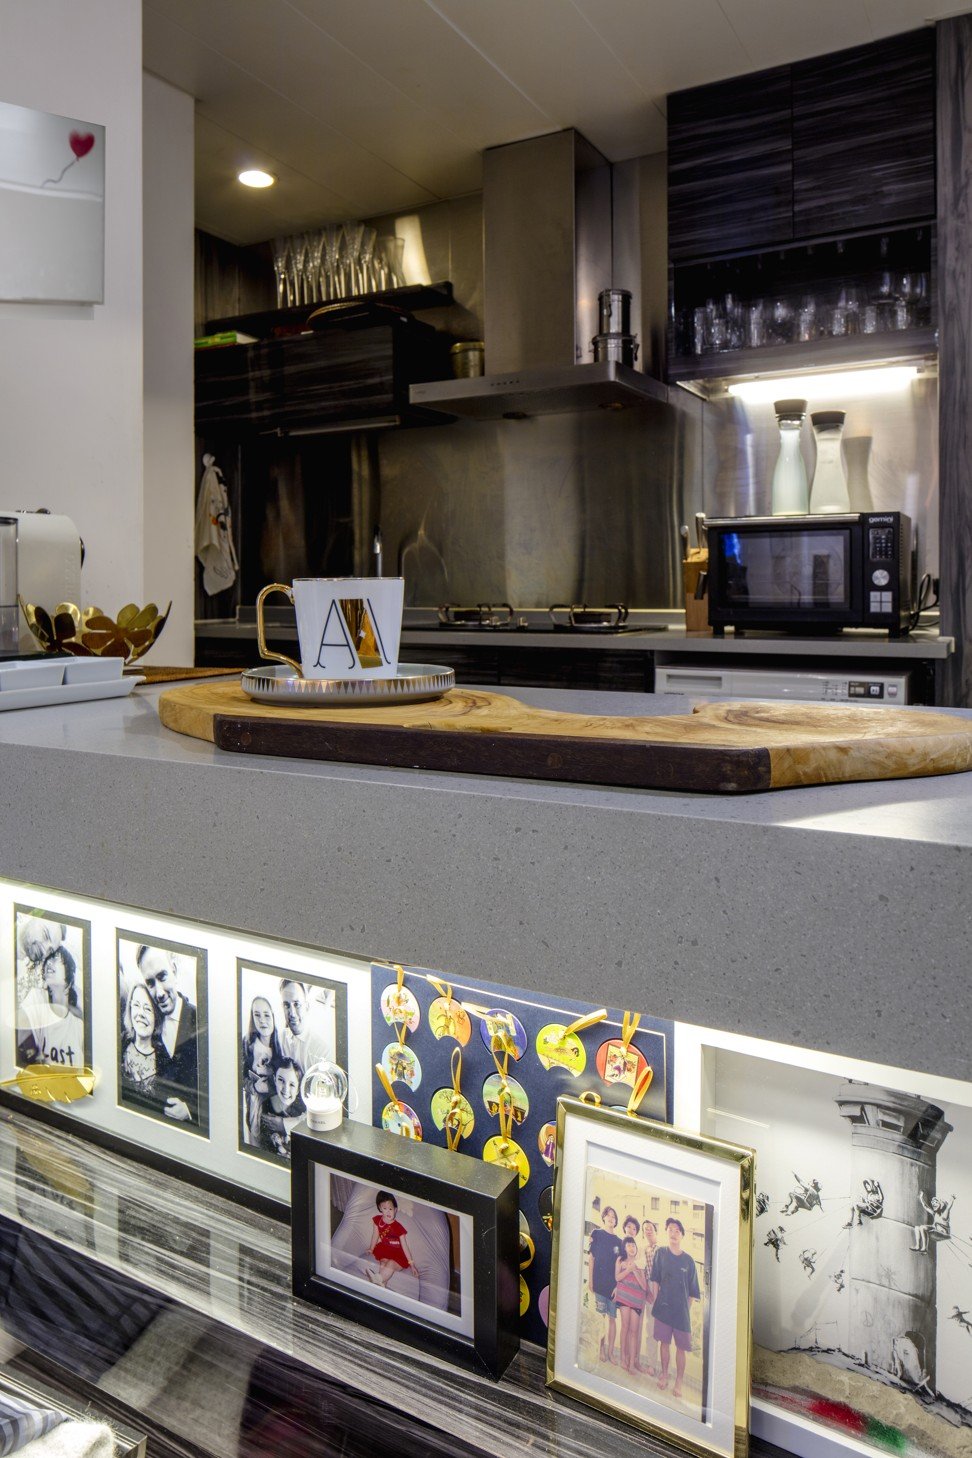 Pictures and prints, including by graffiti artist Banksy, adorn the shelving in the kitchen.